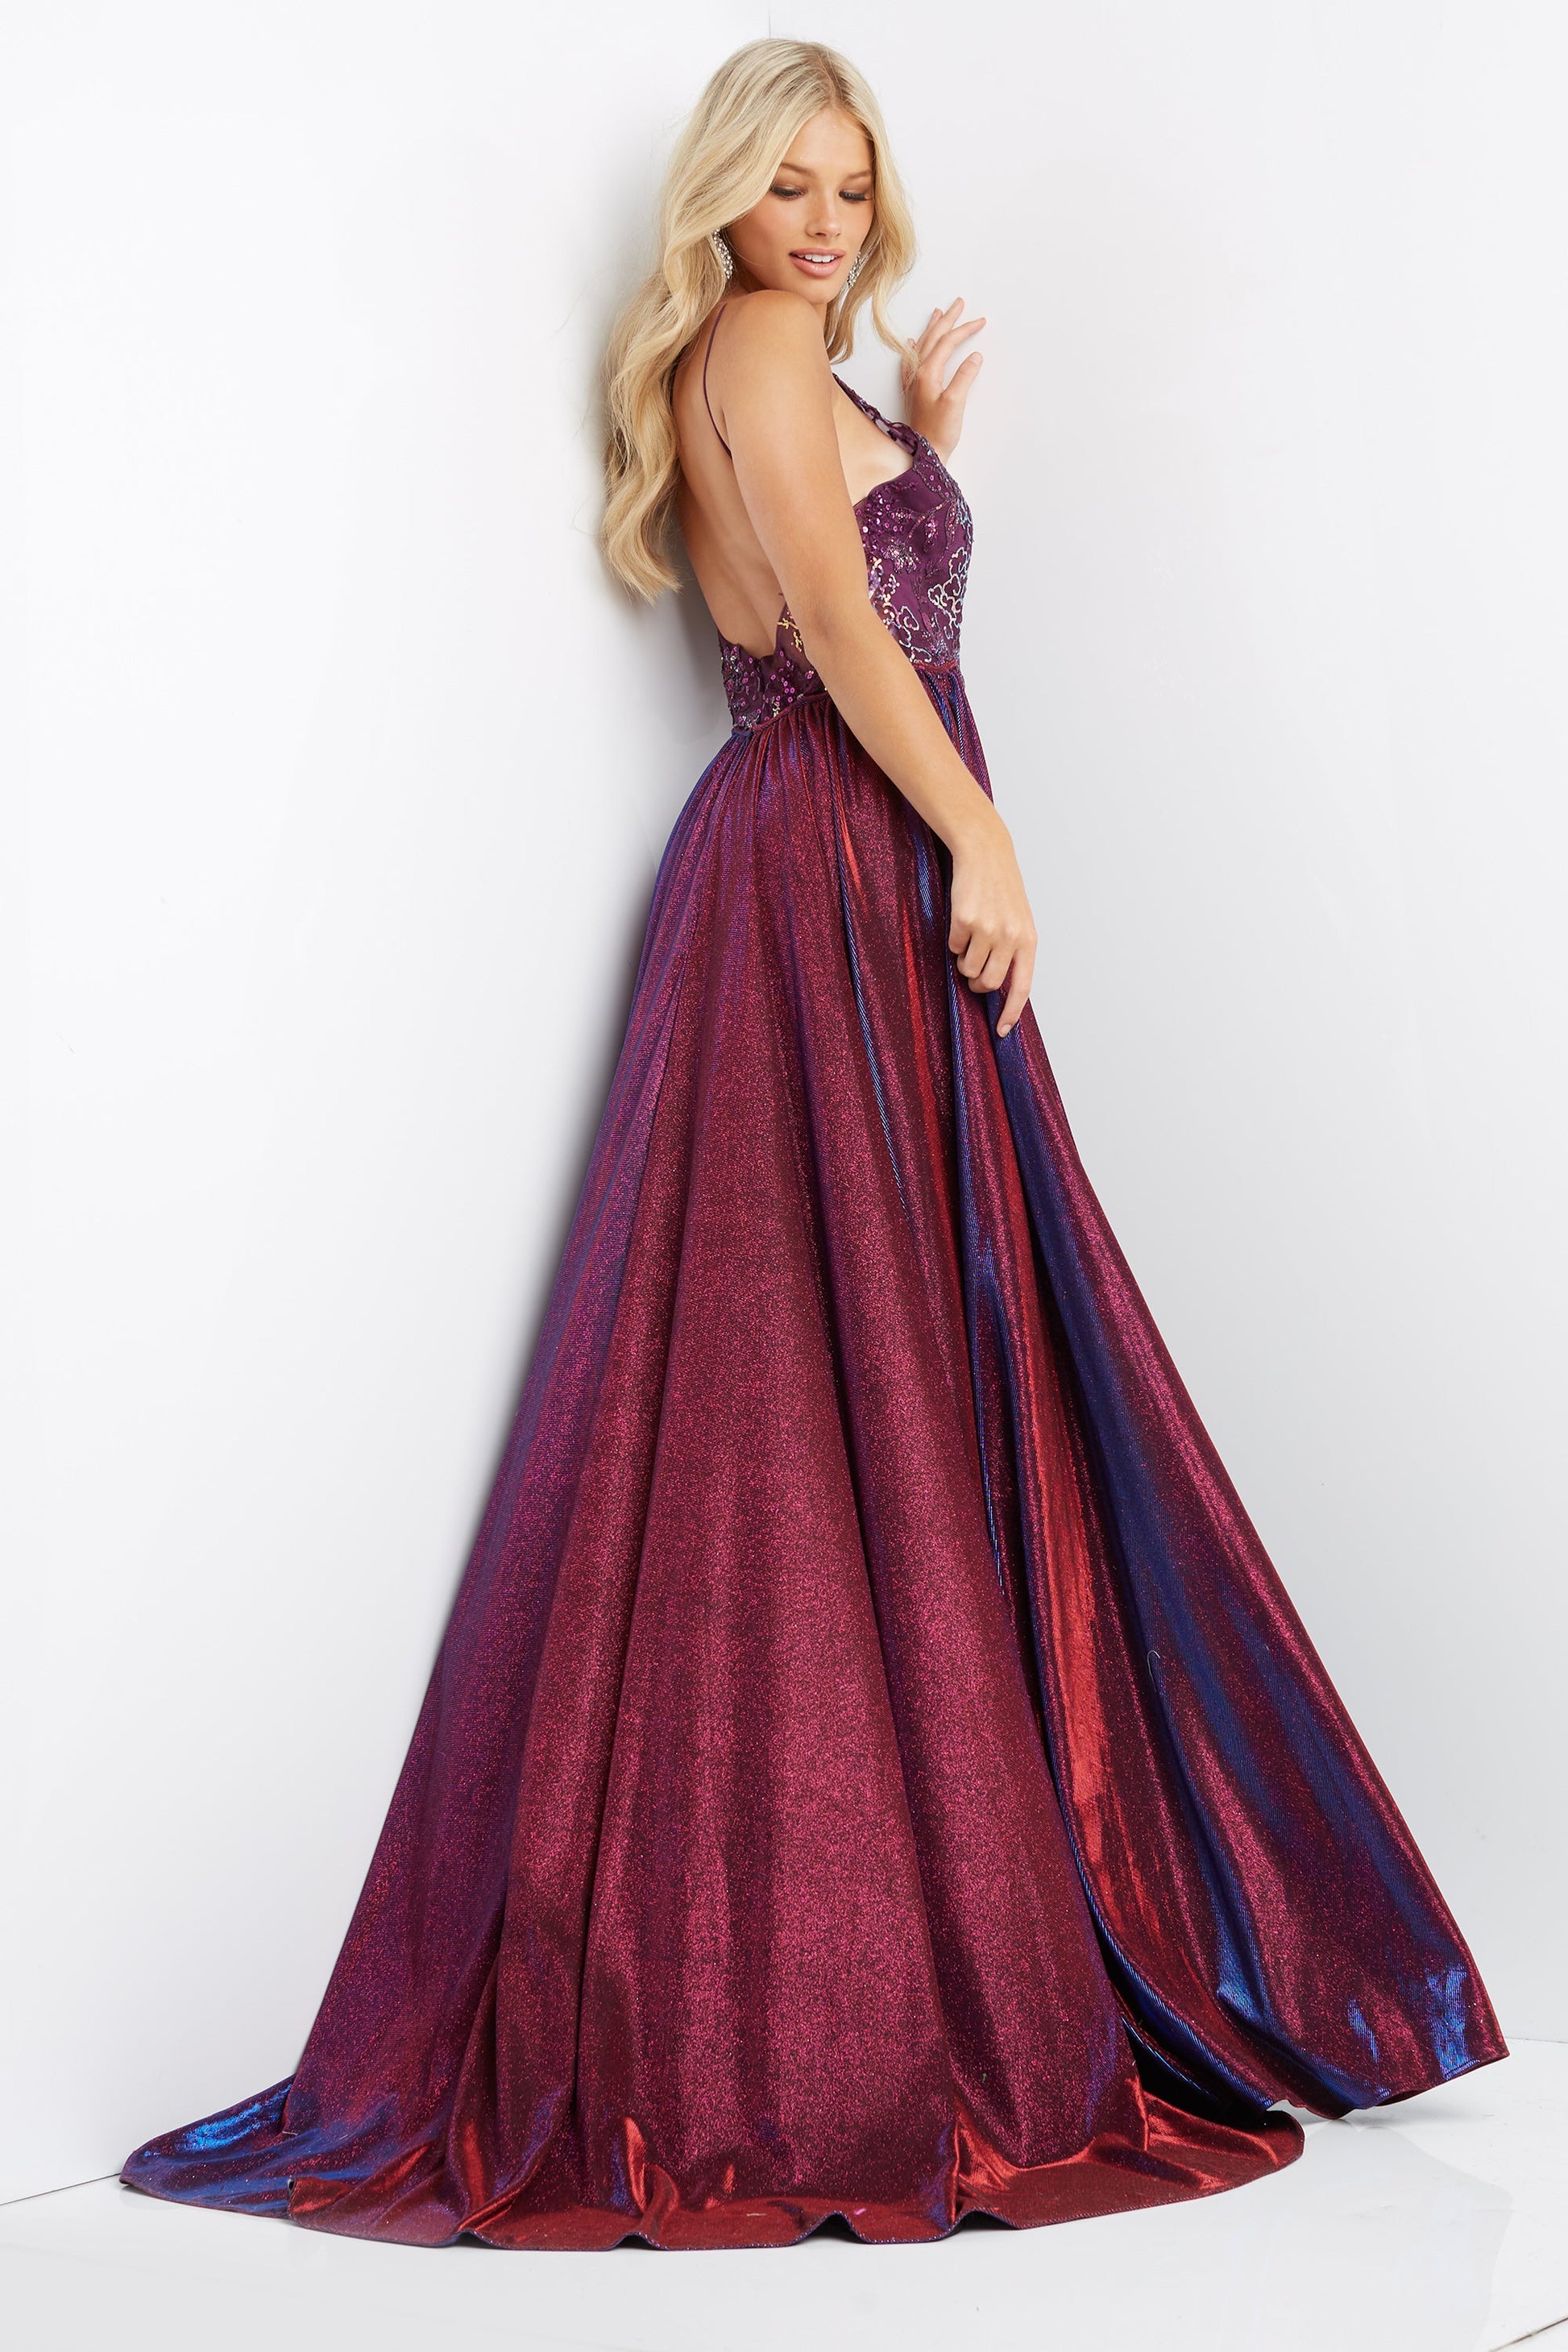 Jovani JVN07379 Long fitted Prom Pageant Gown Overskirt Shimmer Sequin Lace Gown JVN07379 Straight Prom Pageant Gown  Available Size-00-24  Available Color- Periwinkle, Purple